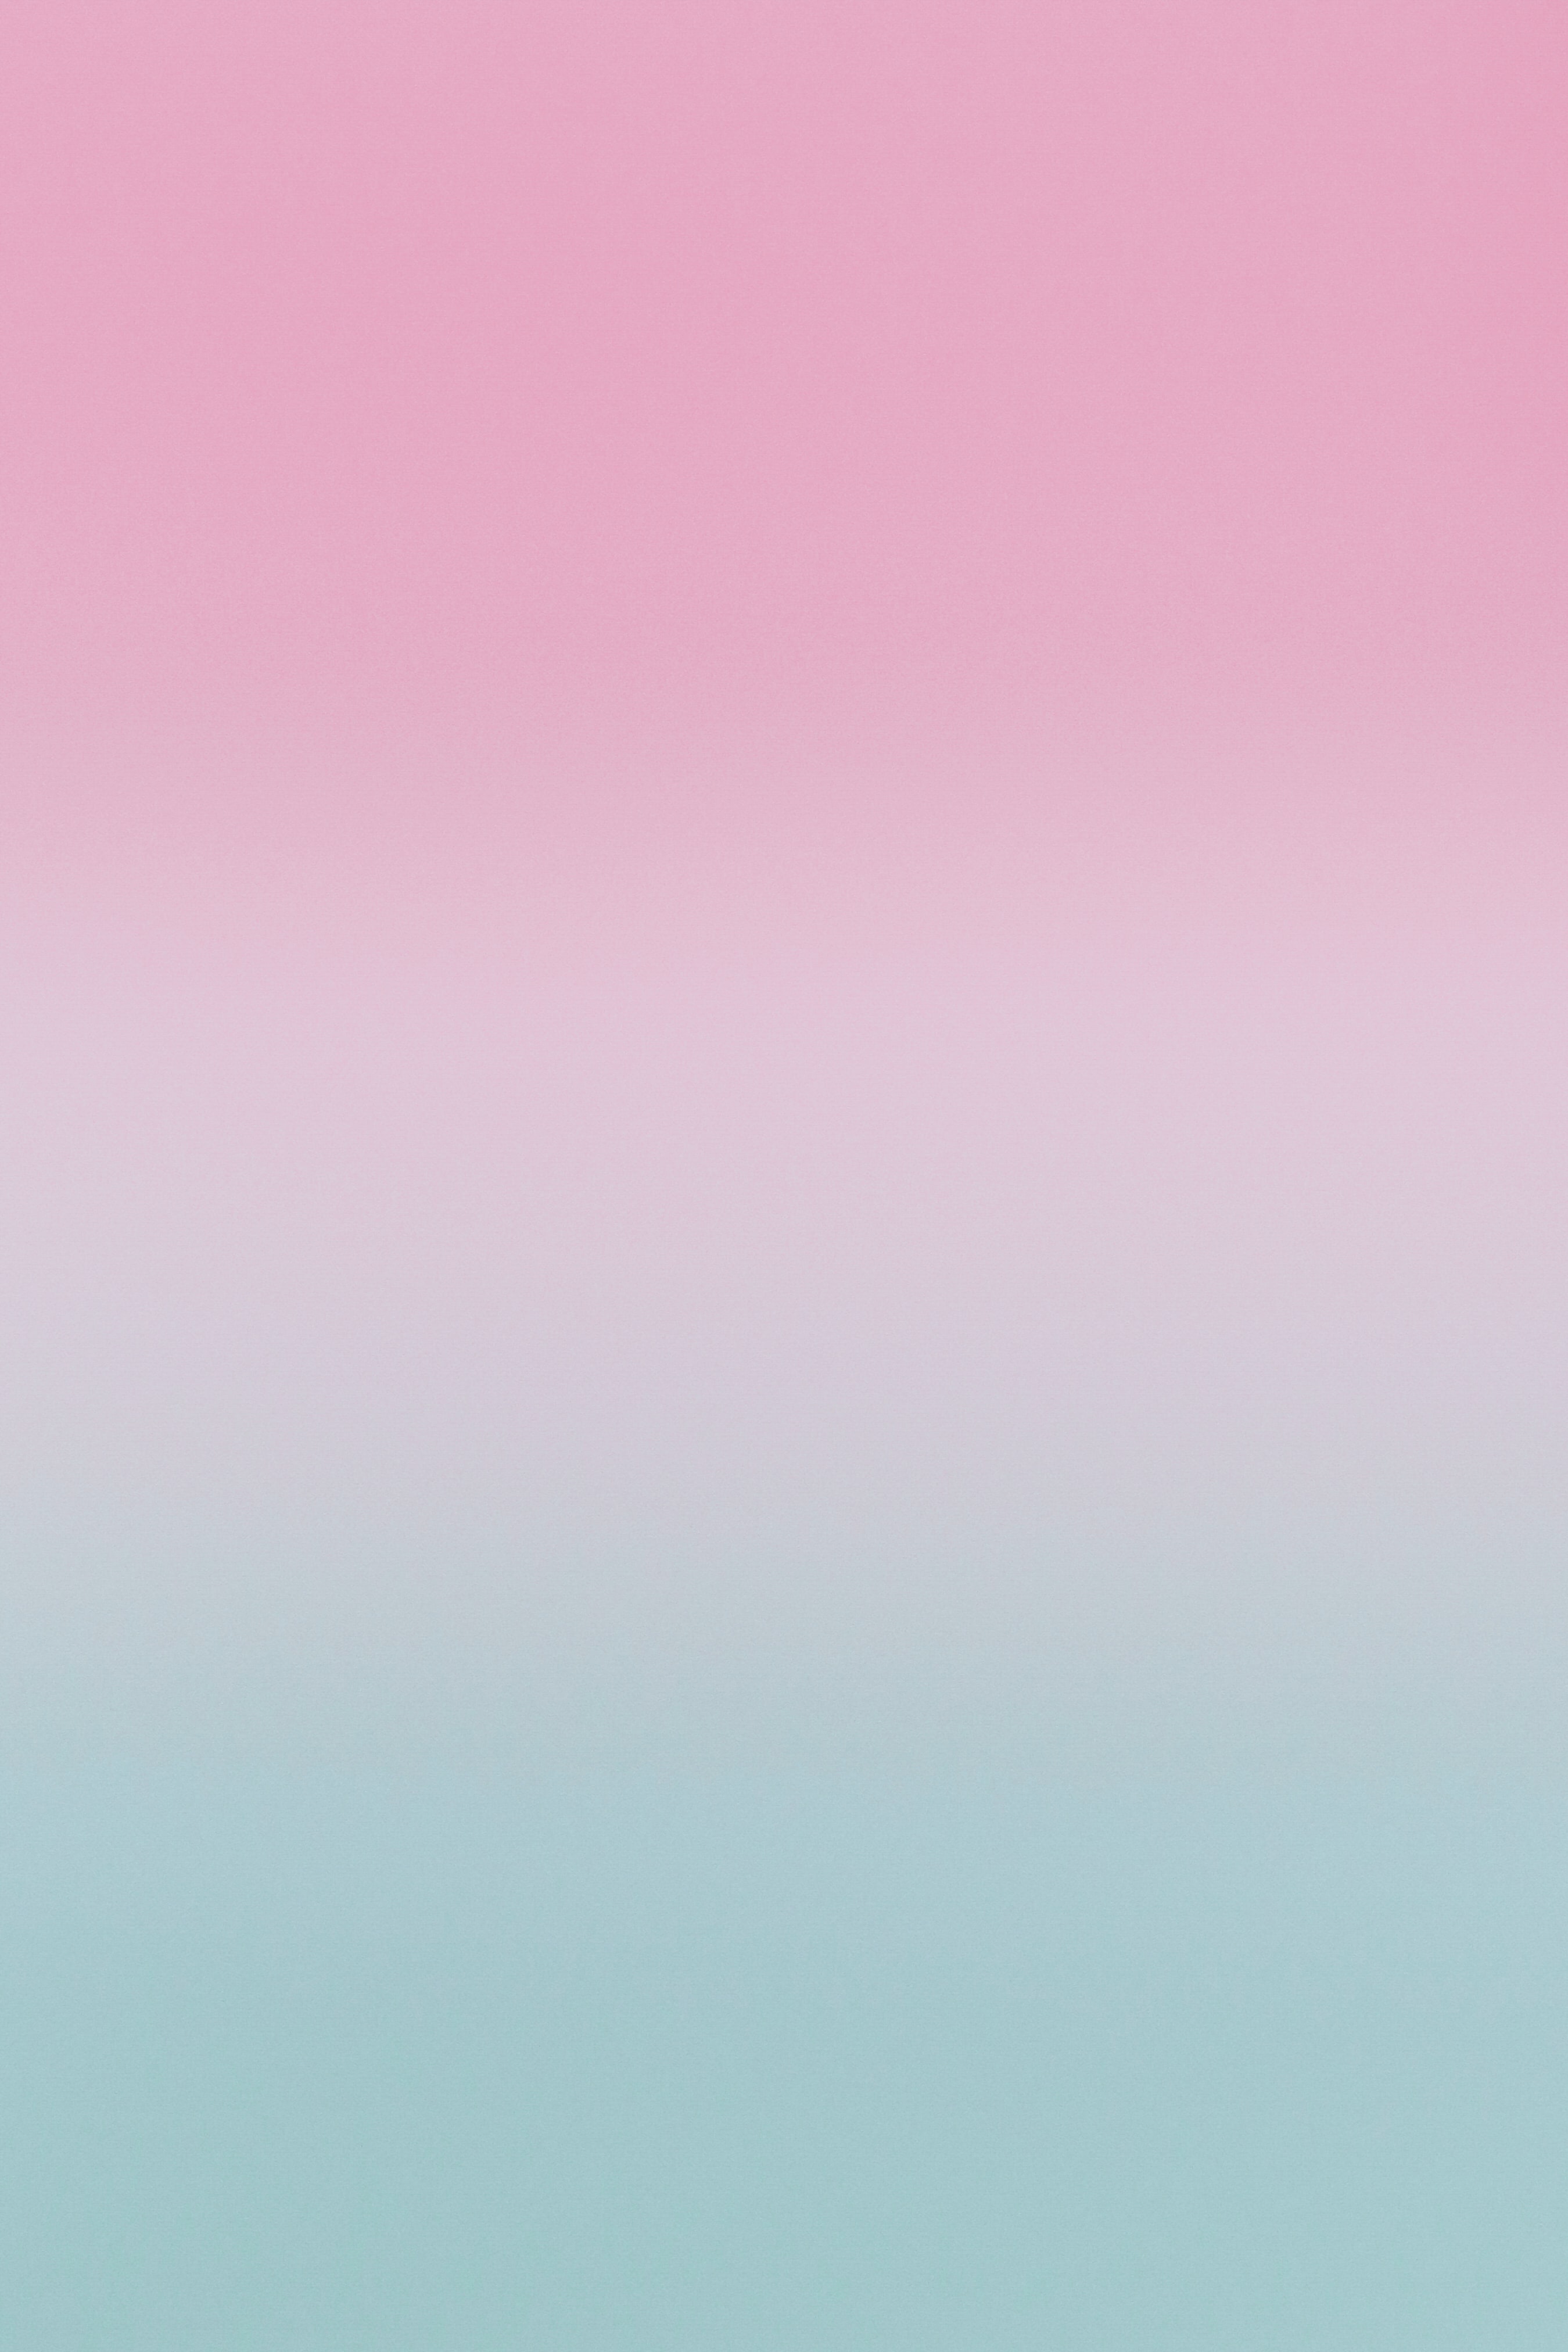 pink, blur, gradient, blue, abstract, smooth